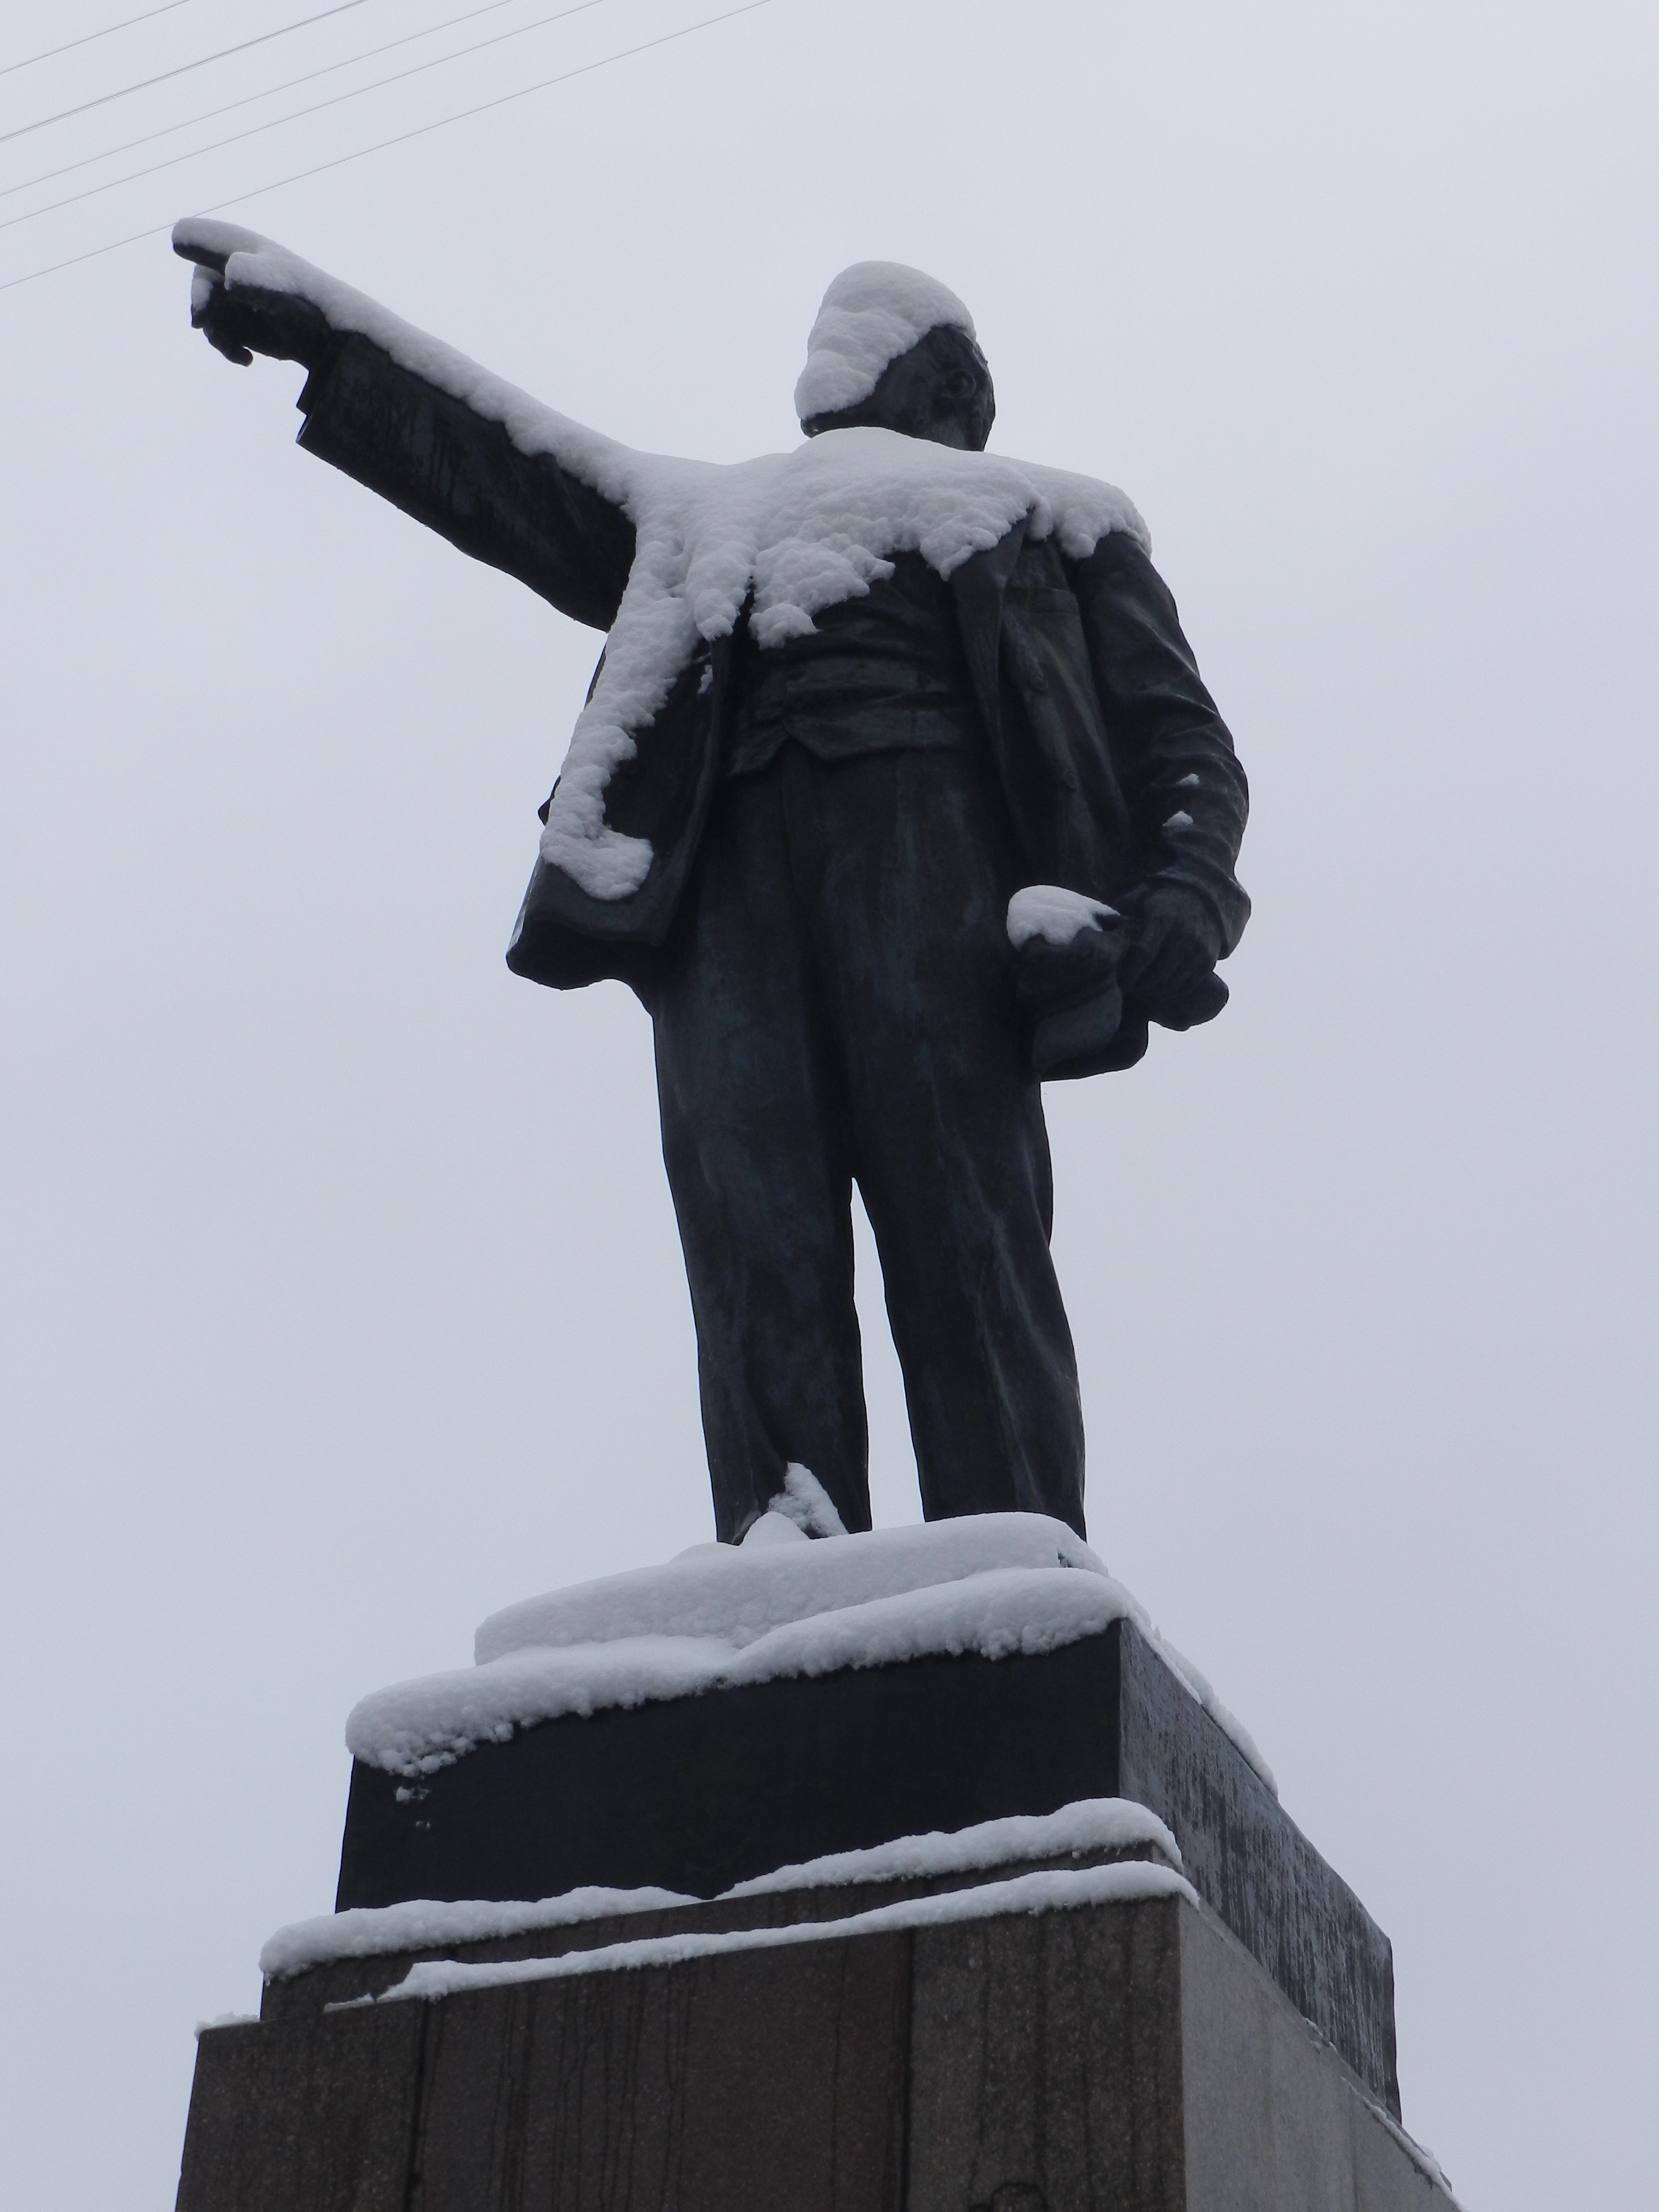 Lenin statues covered with snow | Traveller on a Mission